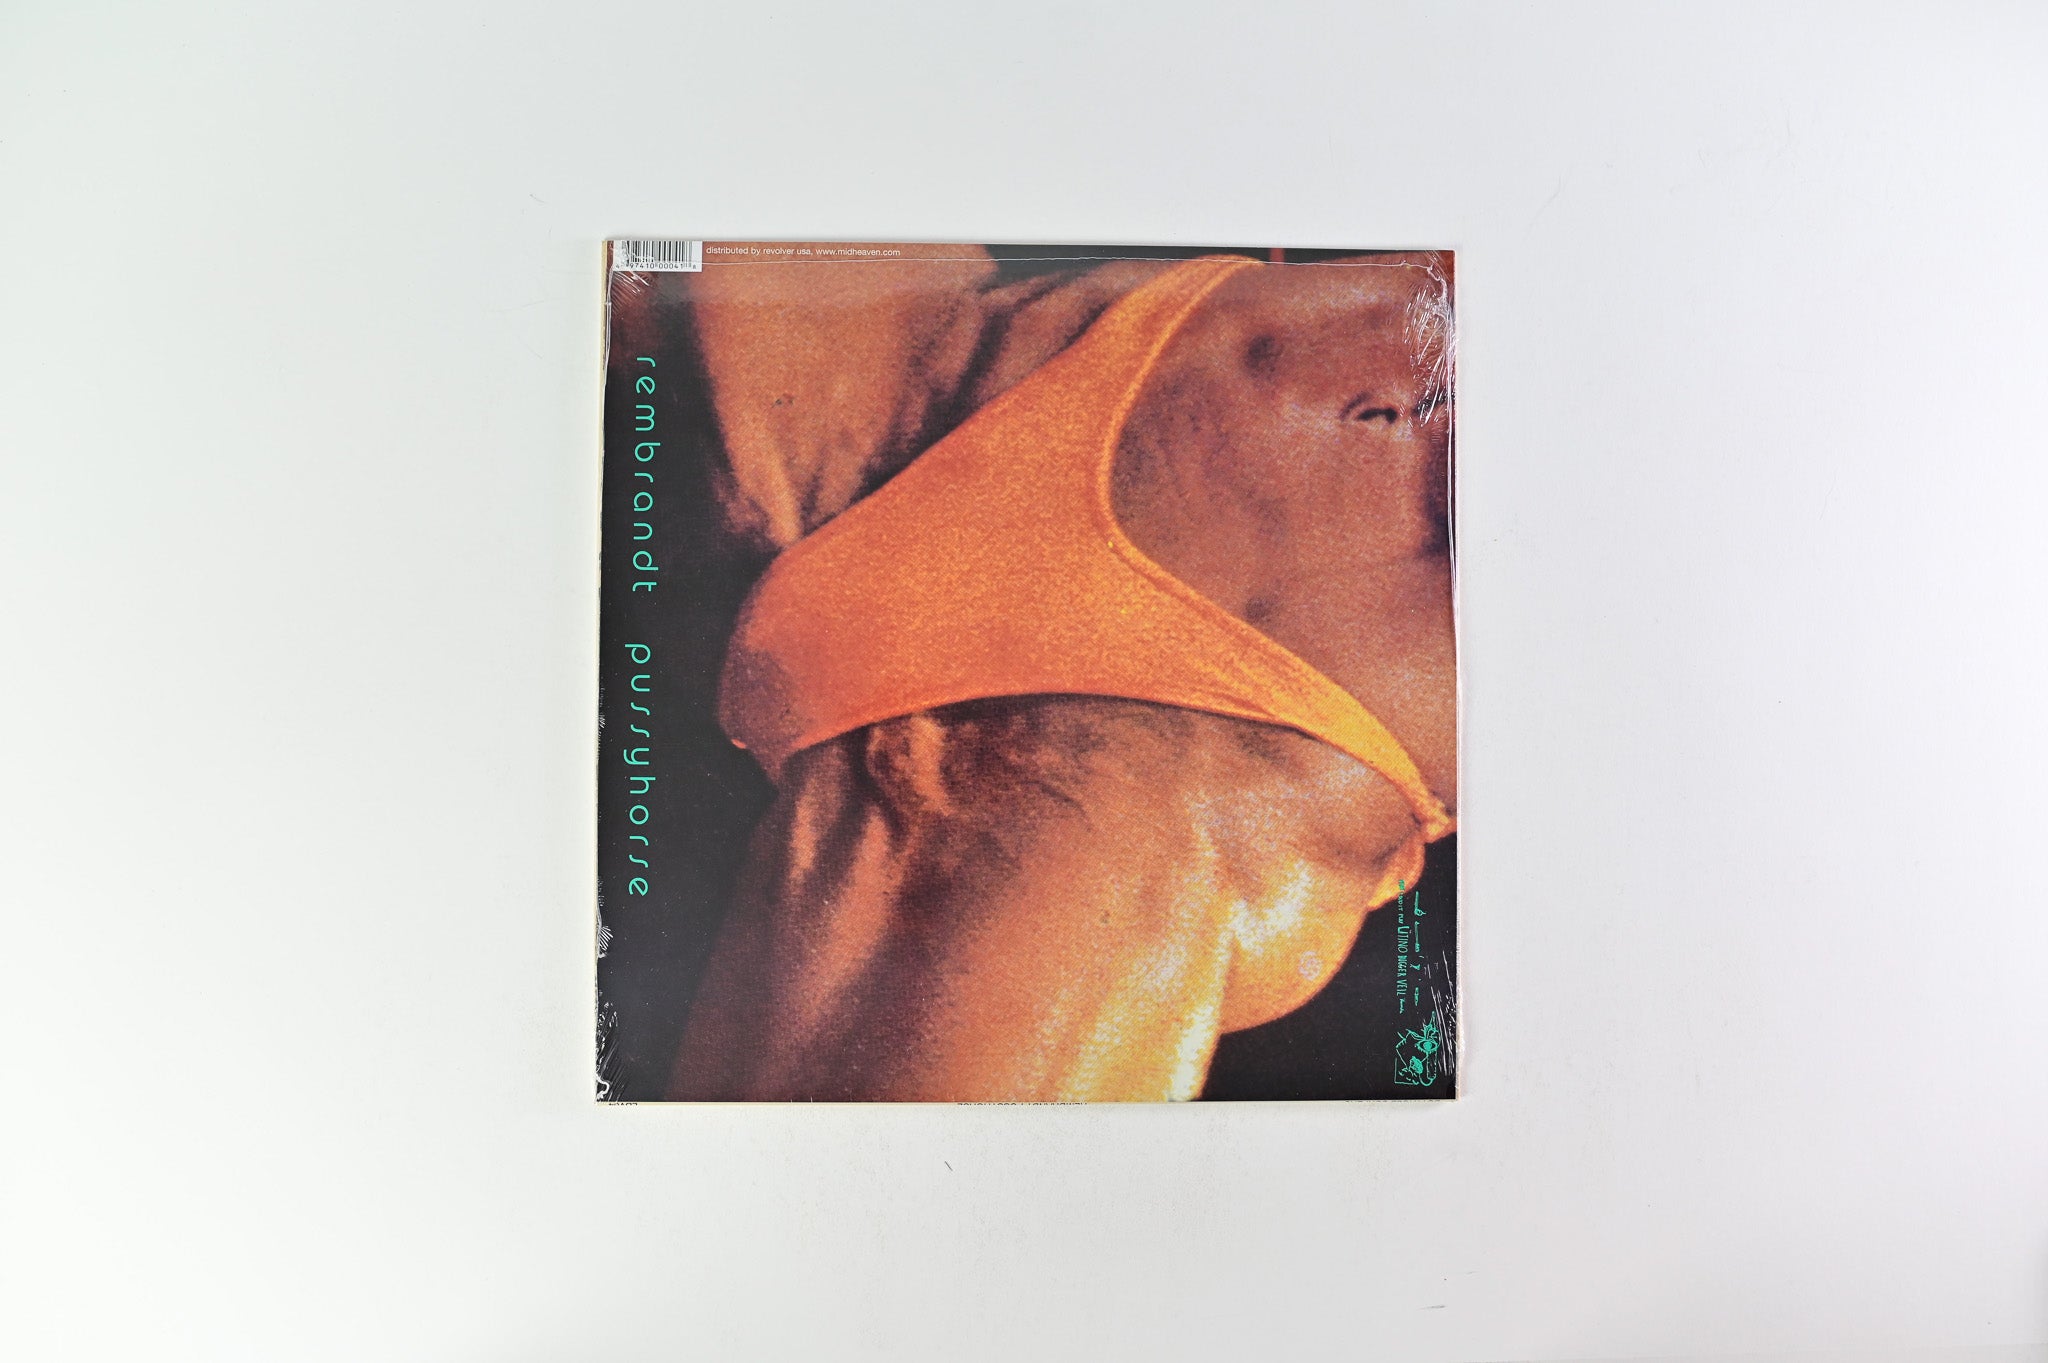 Butthole Surfers - Rembrandt Pussyhorse SEALED on Latino Bugger Veil